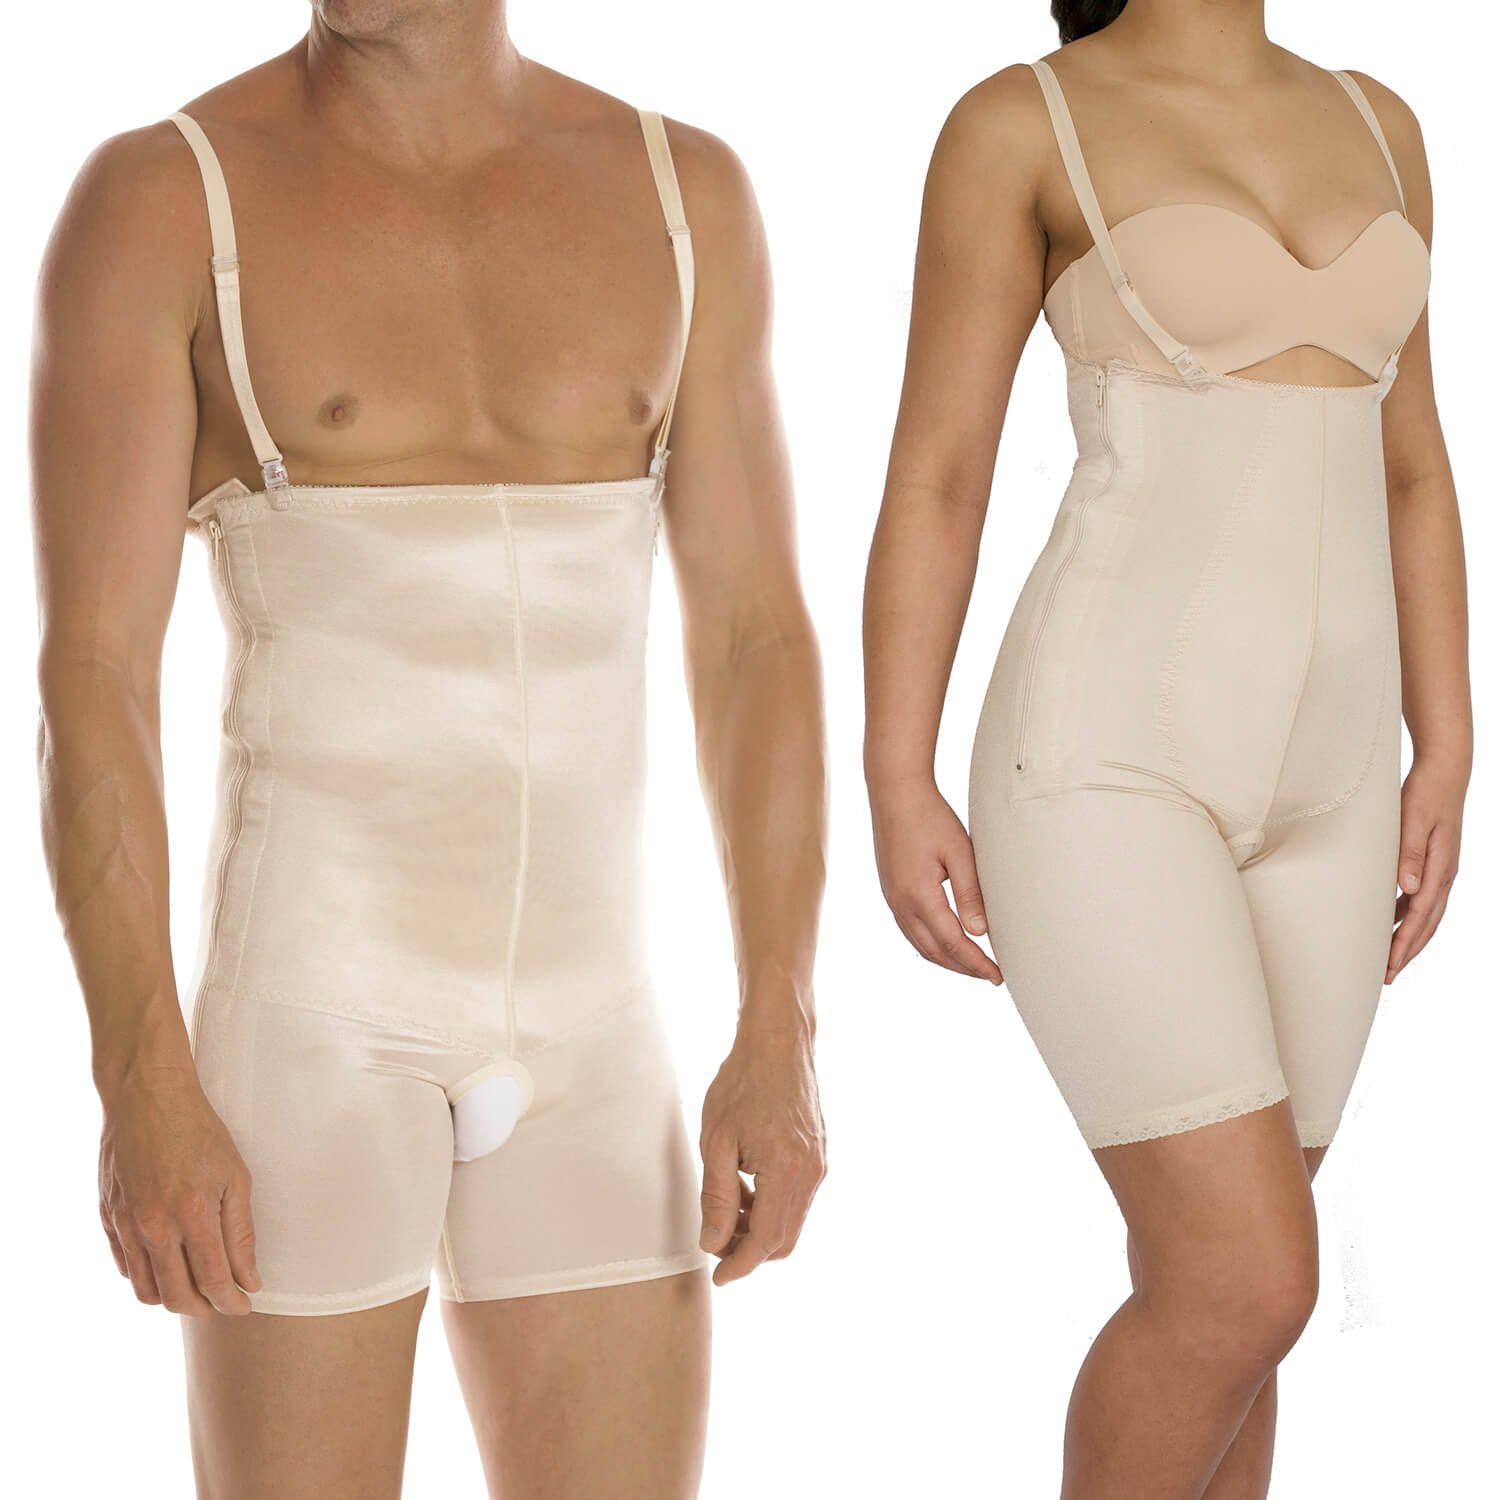 Made to Measure Compression Pants  Sculpture Garments - NZ Made Compression  Garments & Pressurewear